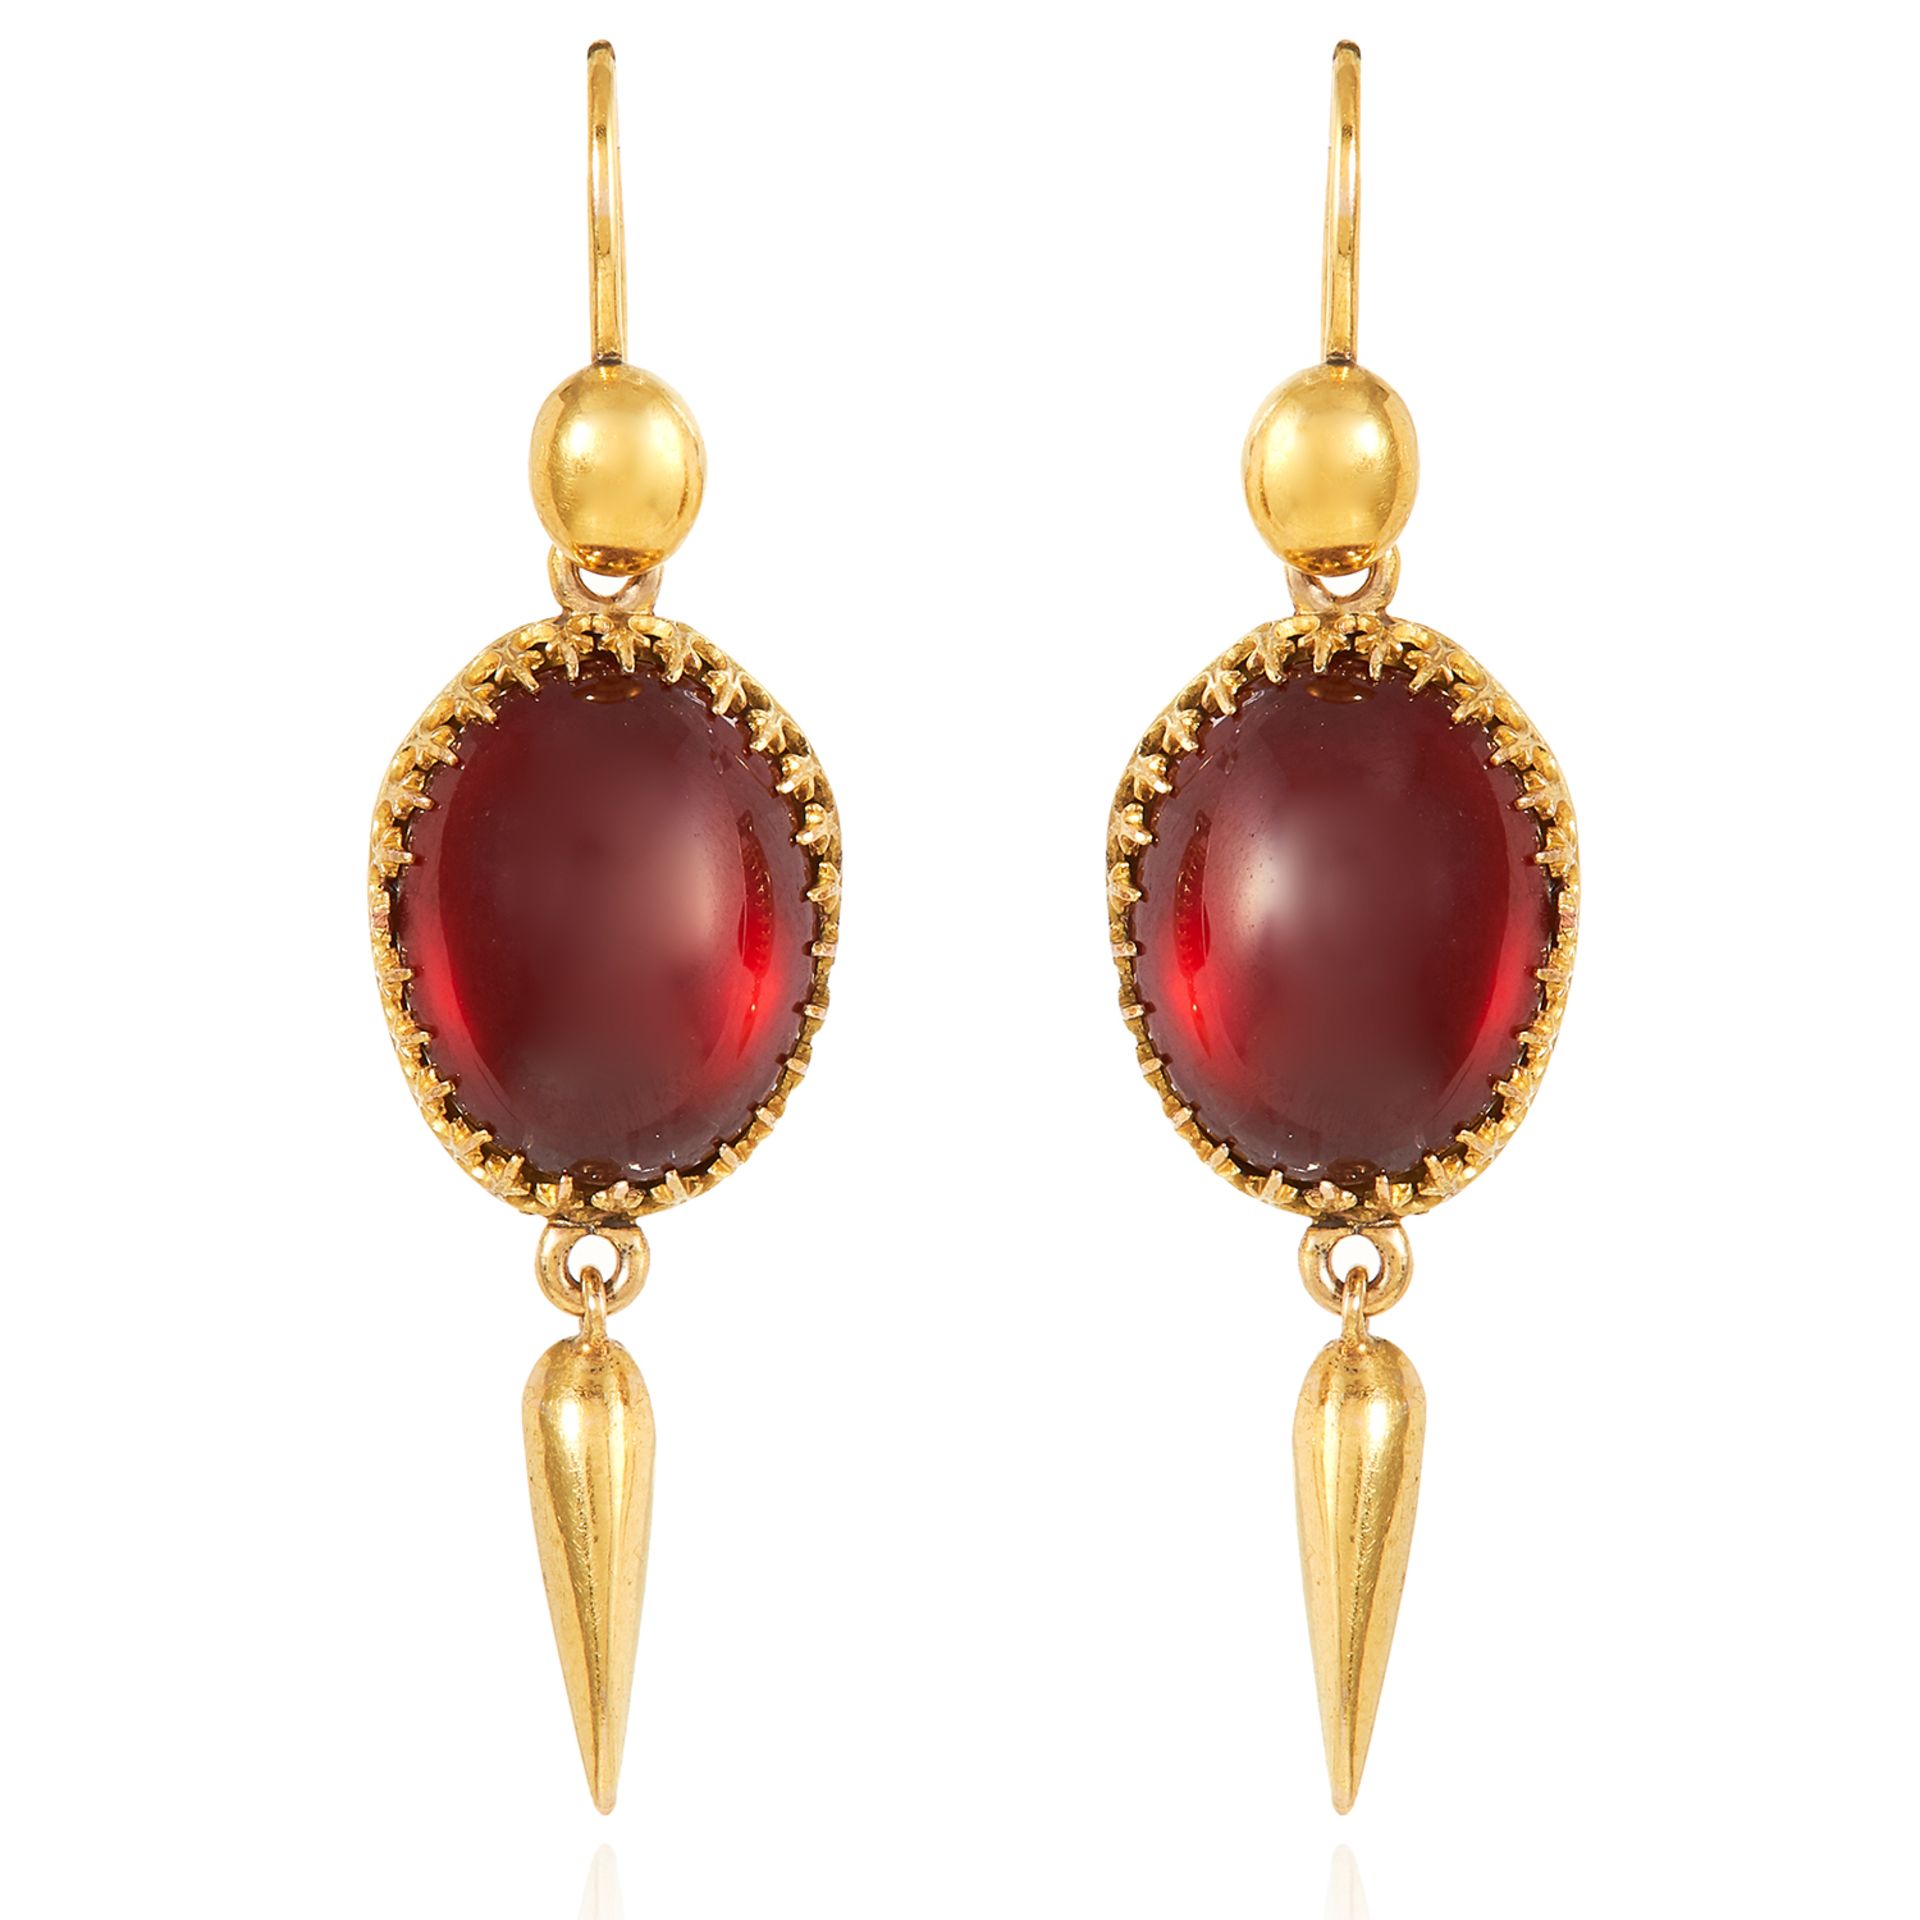 A PAIR OF GARNET DROP EARRINGS, 19TH CENTURY in high carat yellow gold, Etruscan revival, set with